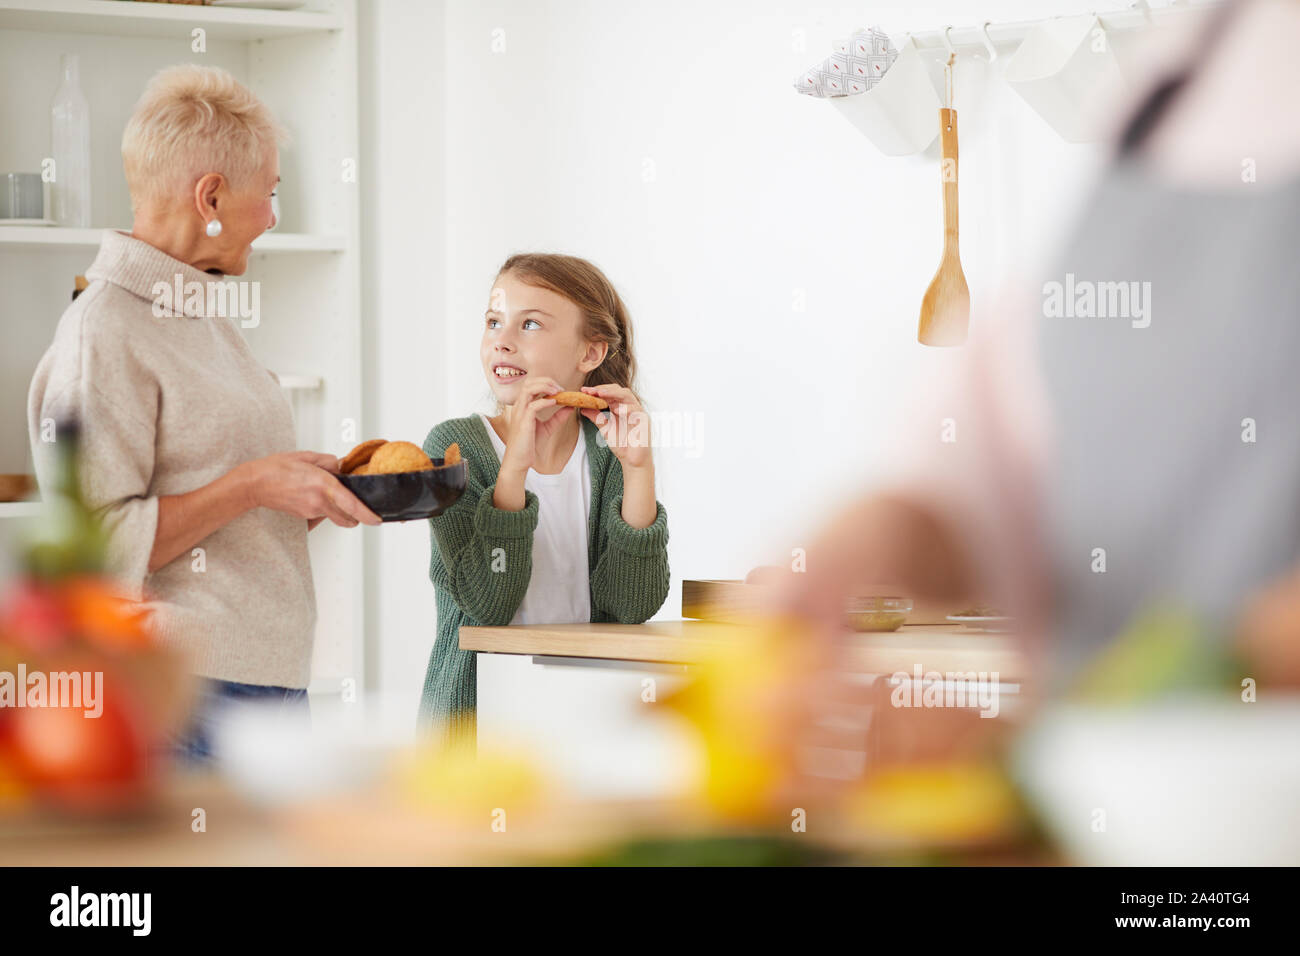 Little girl eating cookies and talking to her grandmother while they standing in domestic kitchen Stock Photo